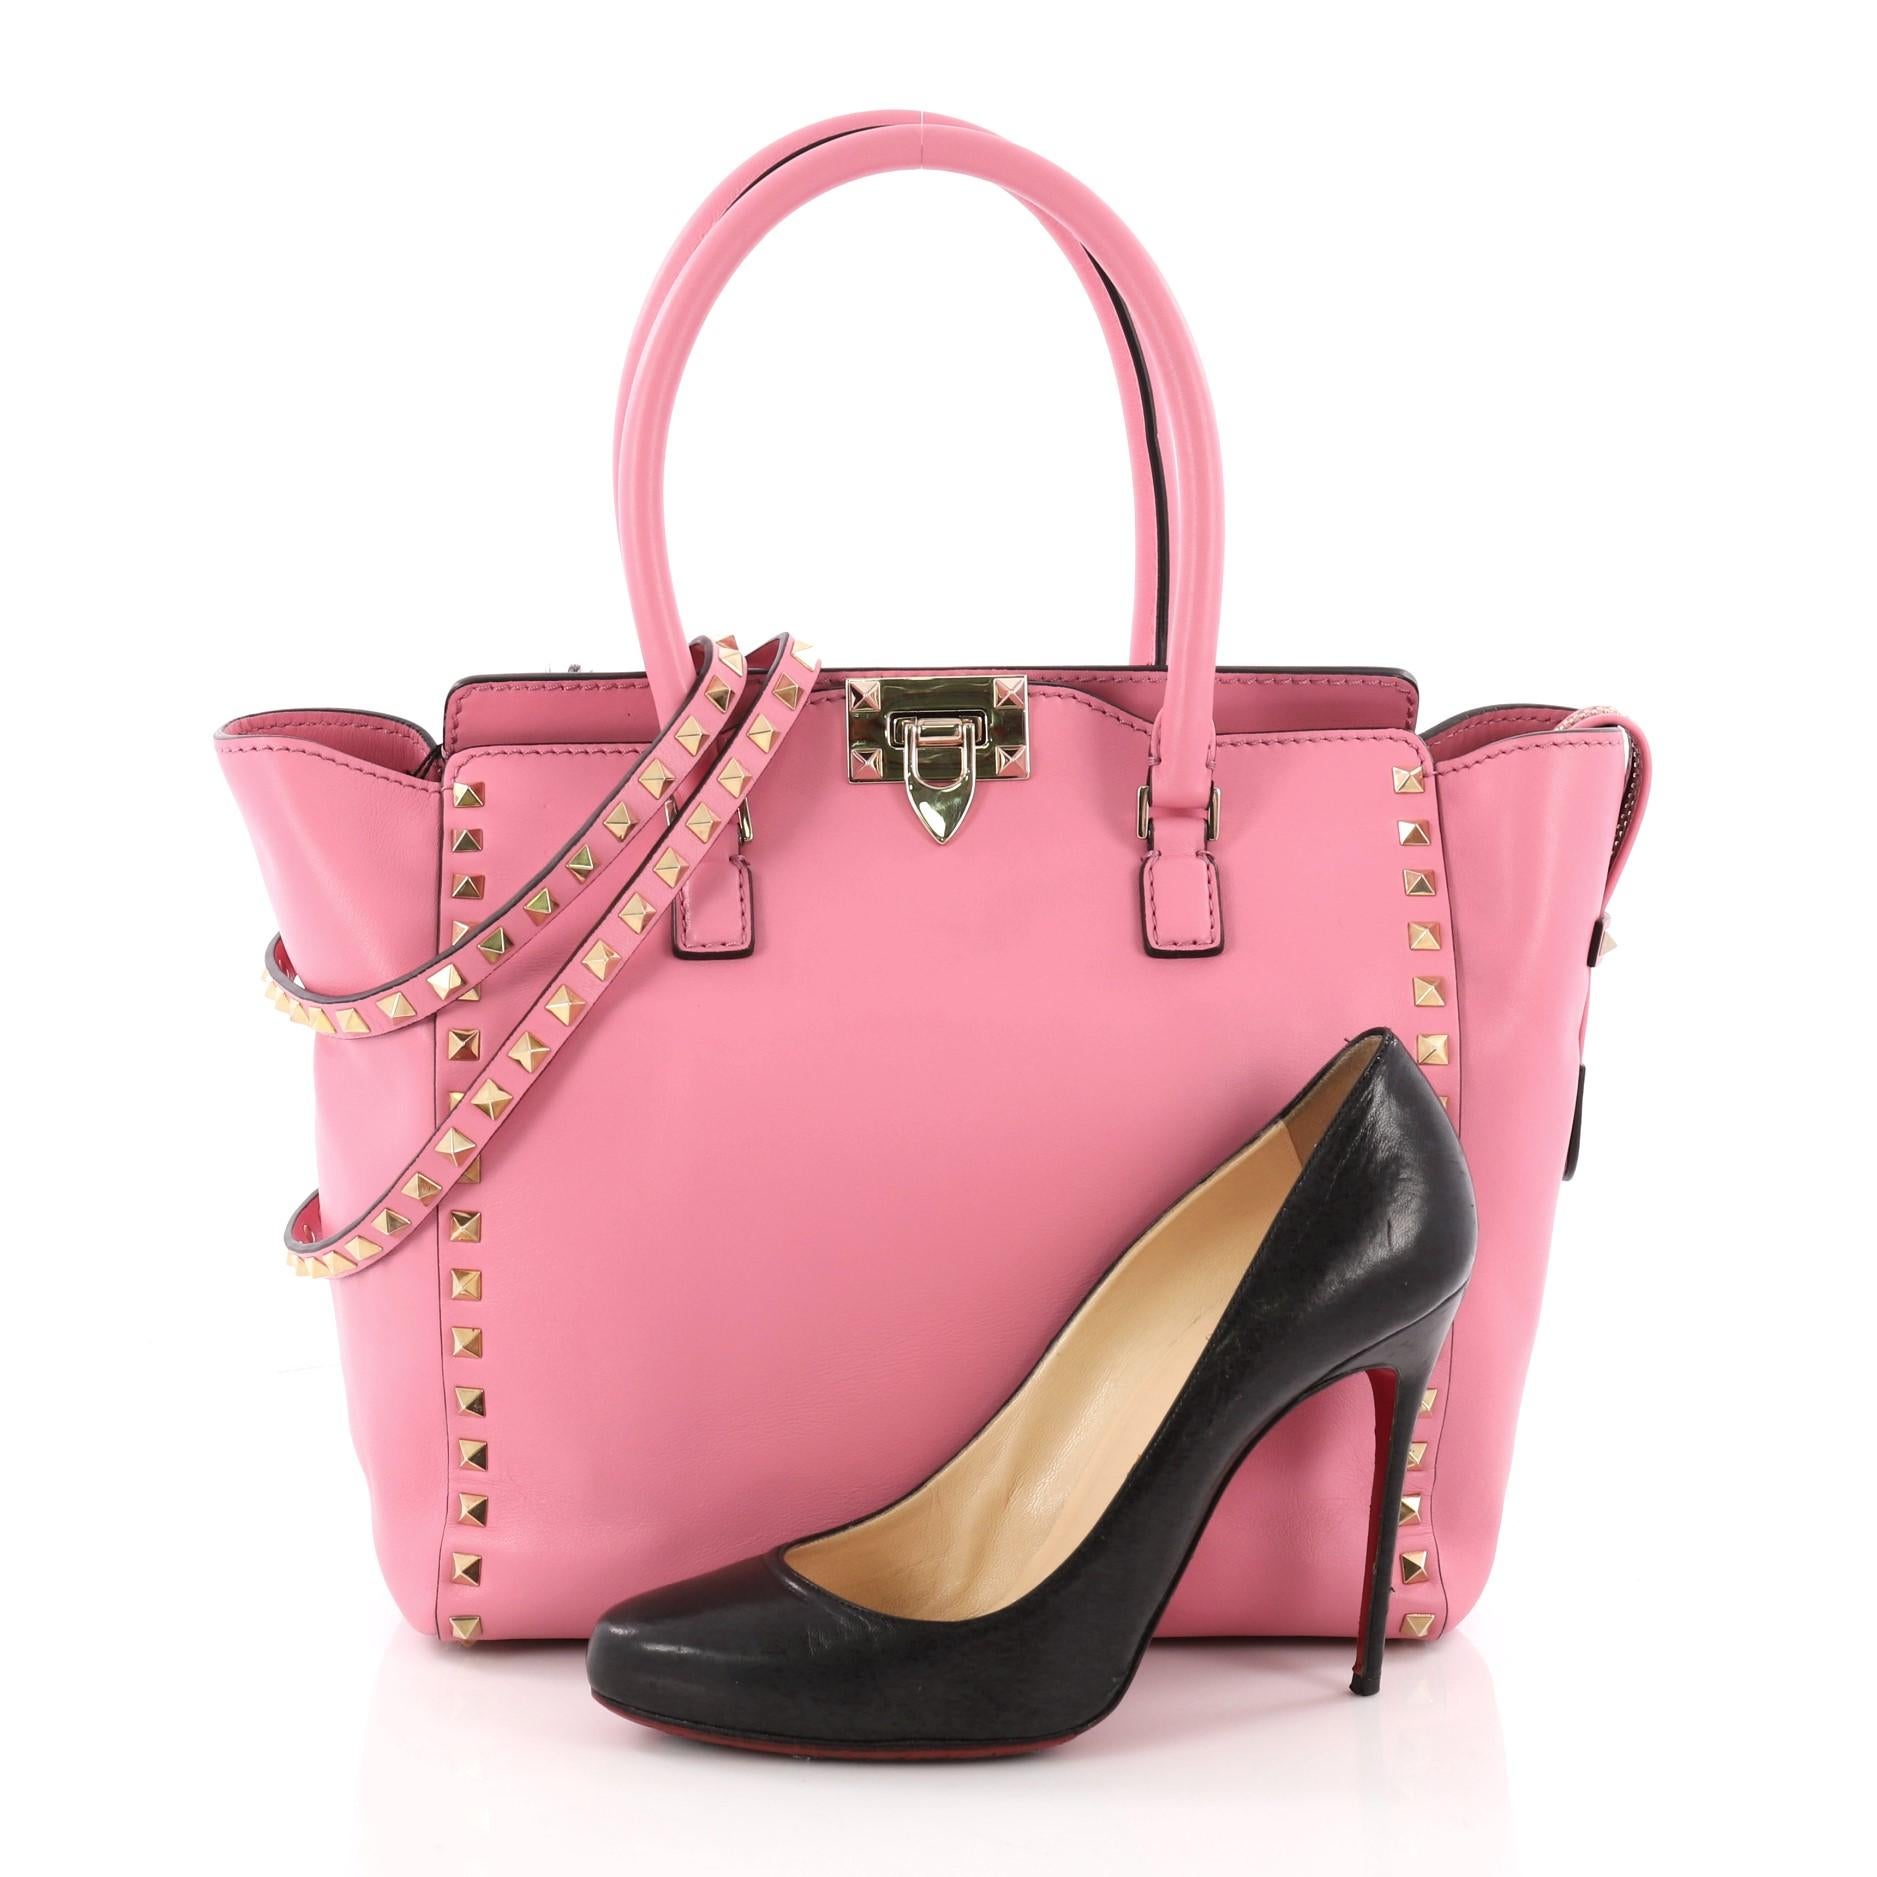 This authentic Valentino Rockstud Tote Rigid Leather Medium is a stylish and iconic bag that is one of today's most sought-after styles. Crafted from beautiful pink rigid leather, this chic tote features signature gold pyramid stud border,